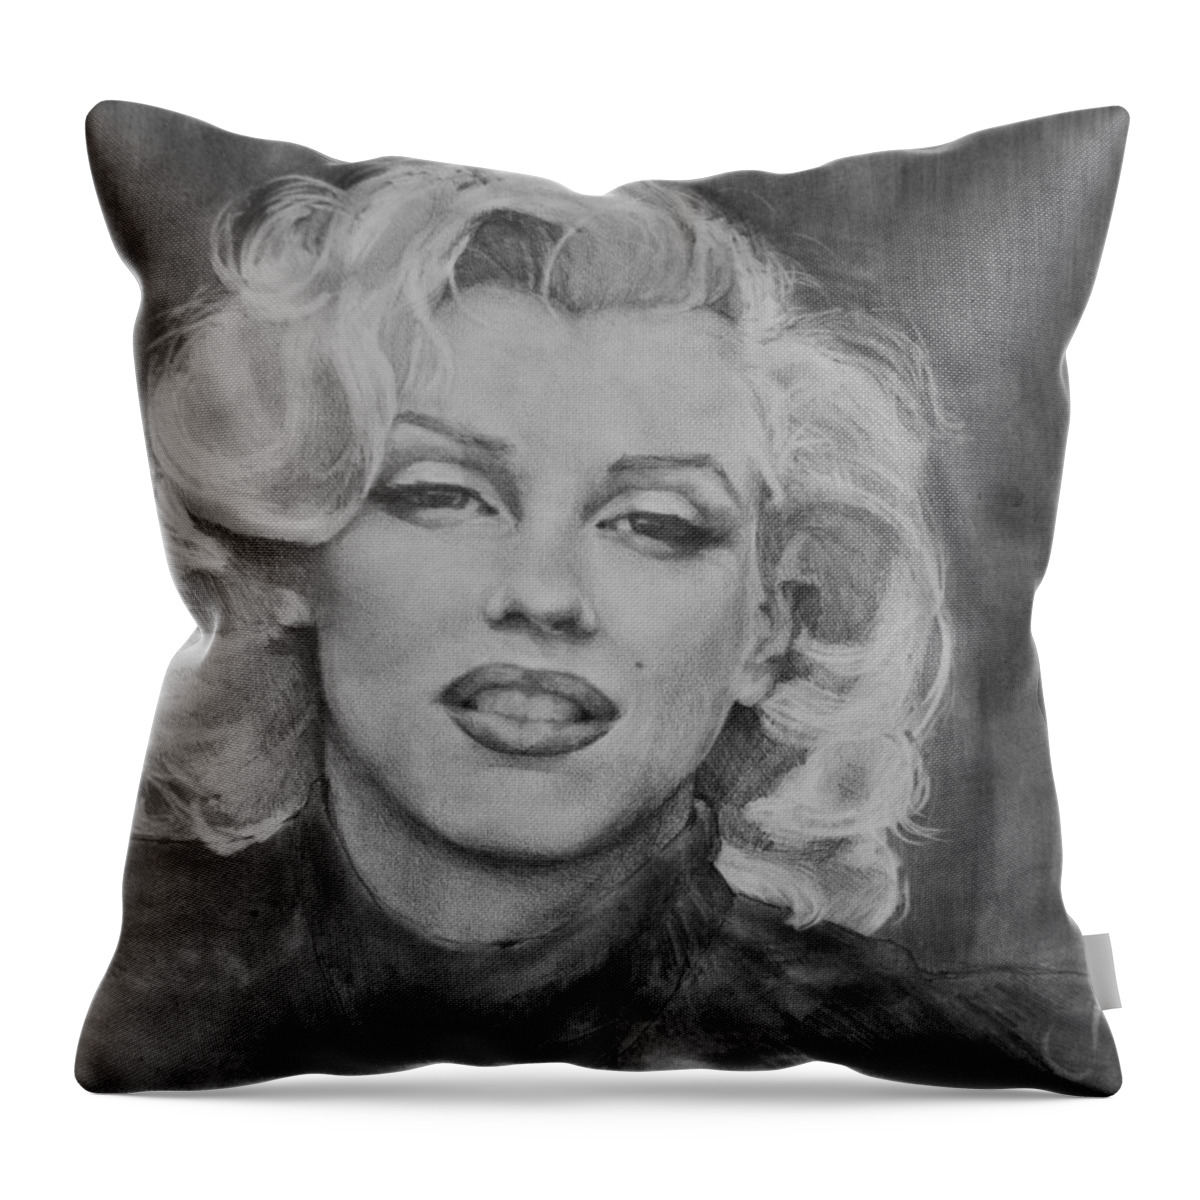 Marilyn Monroe Throw Pillow featuring the painting Marilyn Monroe by Jani Freimann